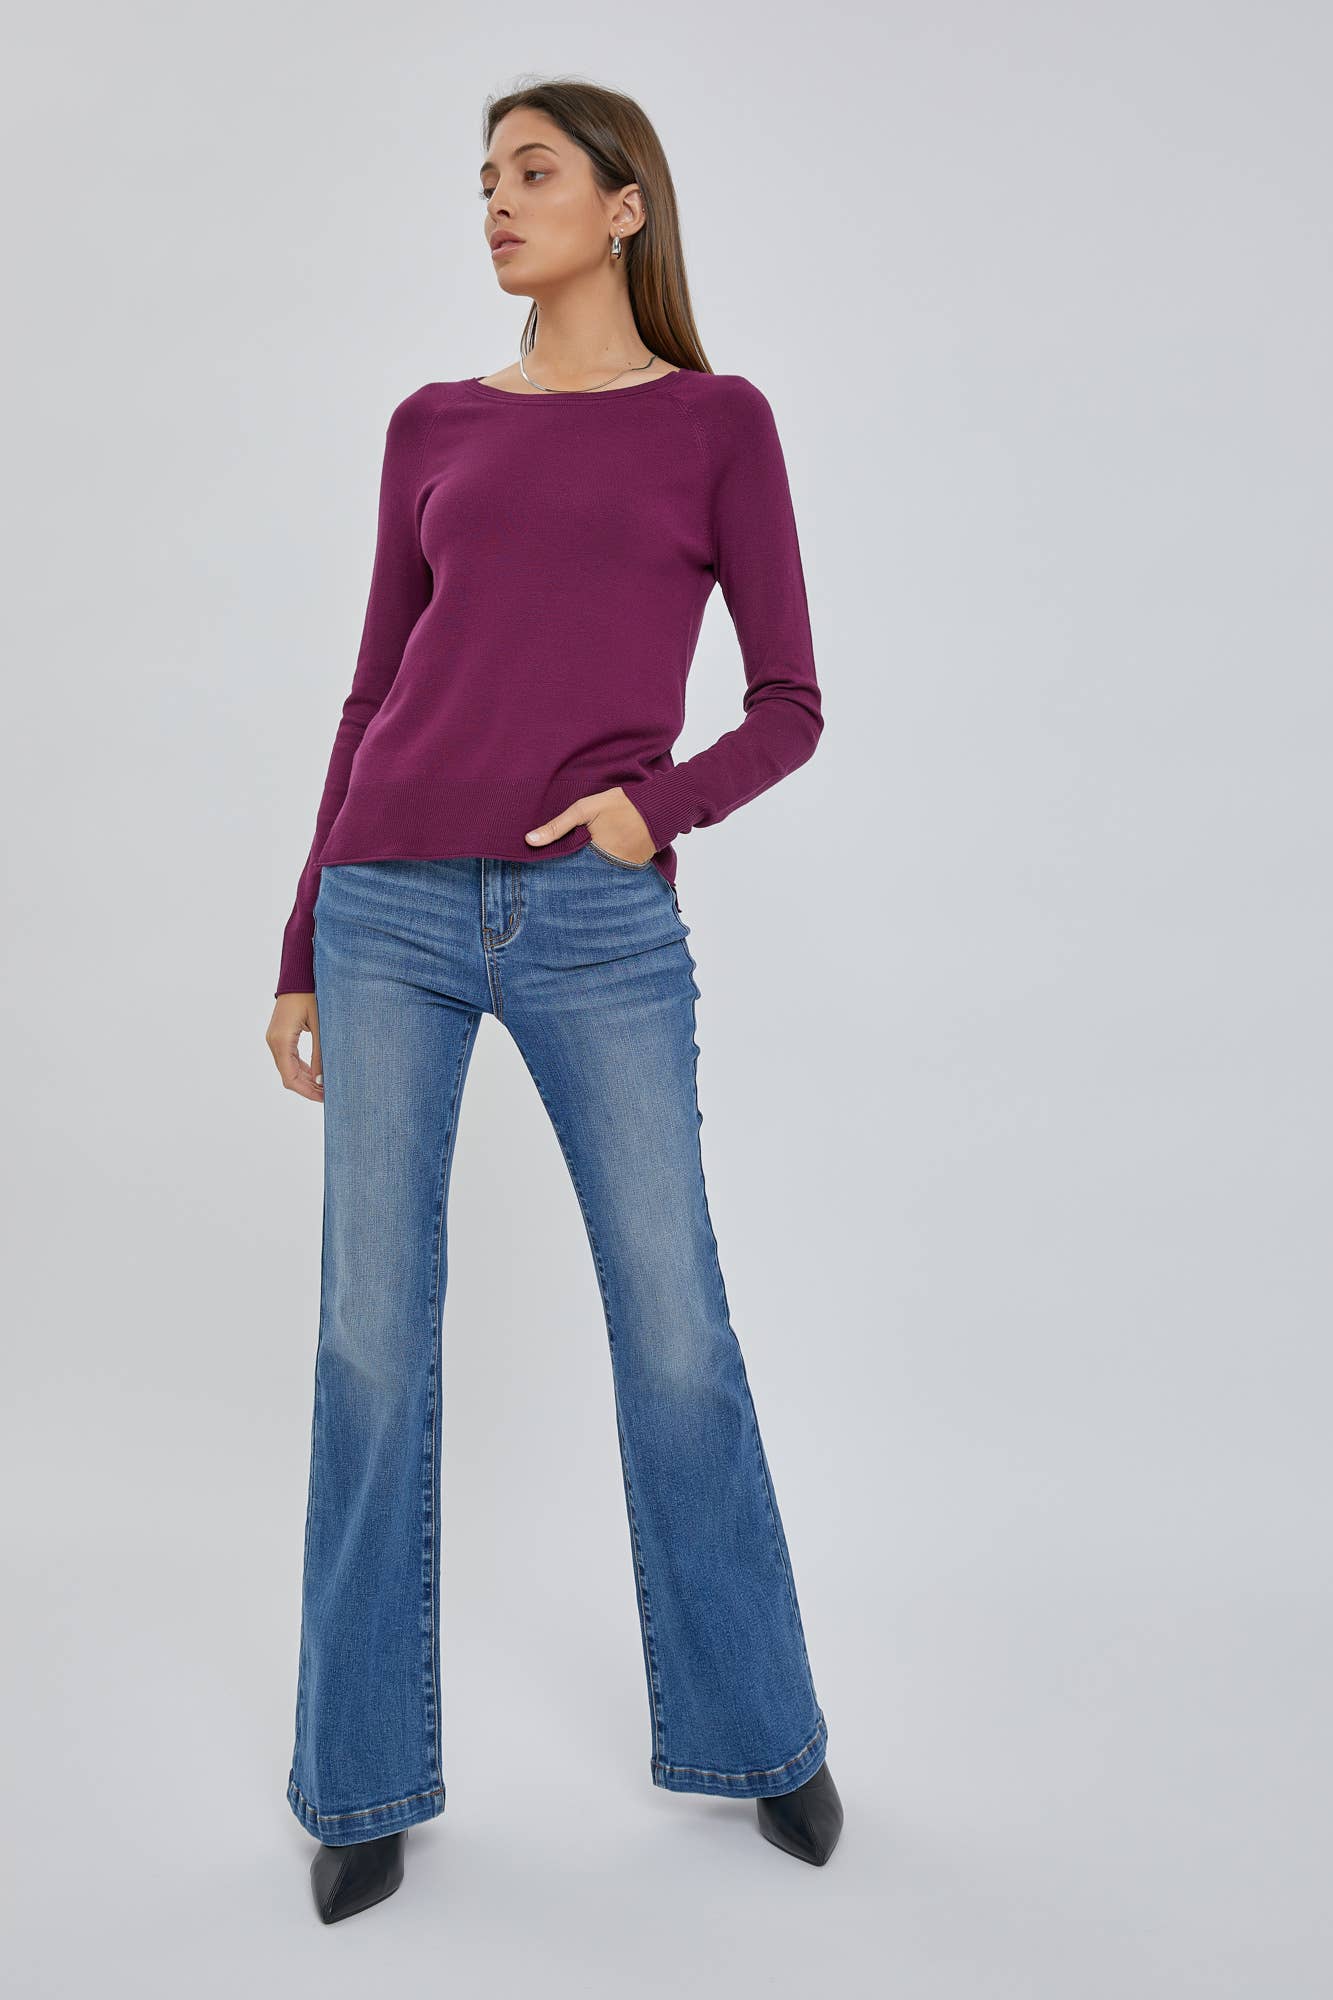 The Camille Sweater: Large / Cobalt